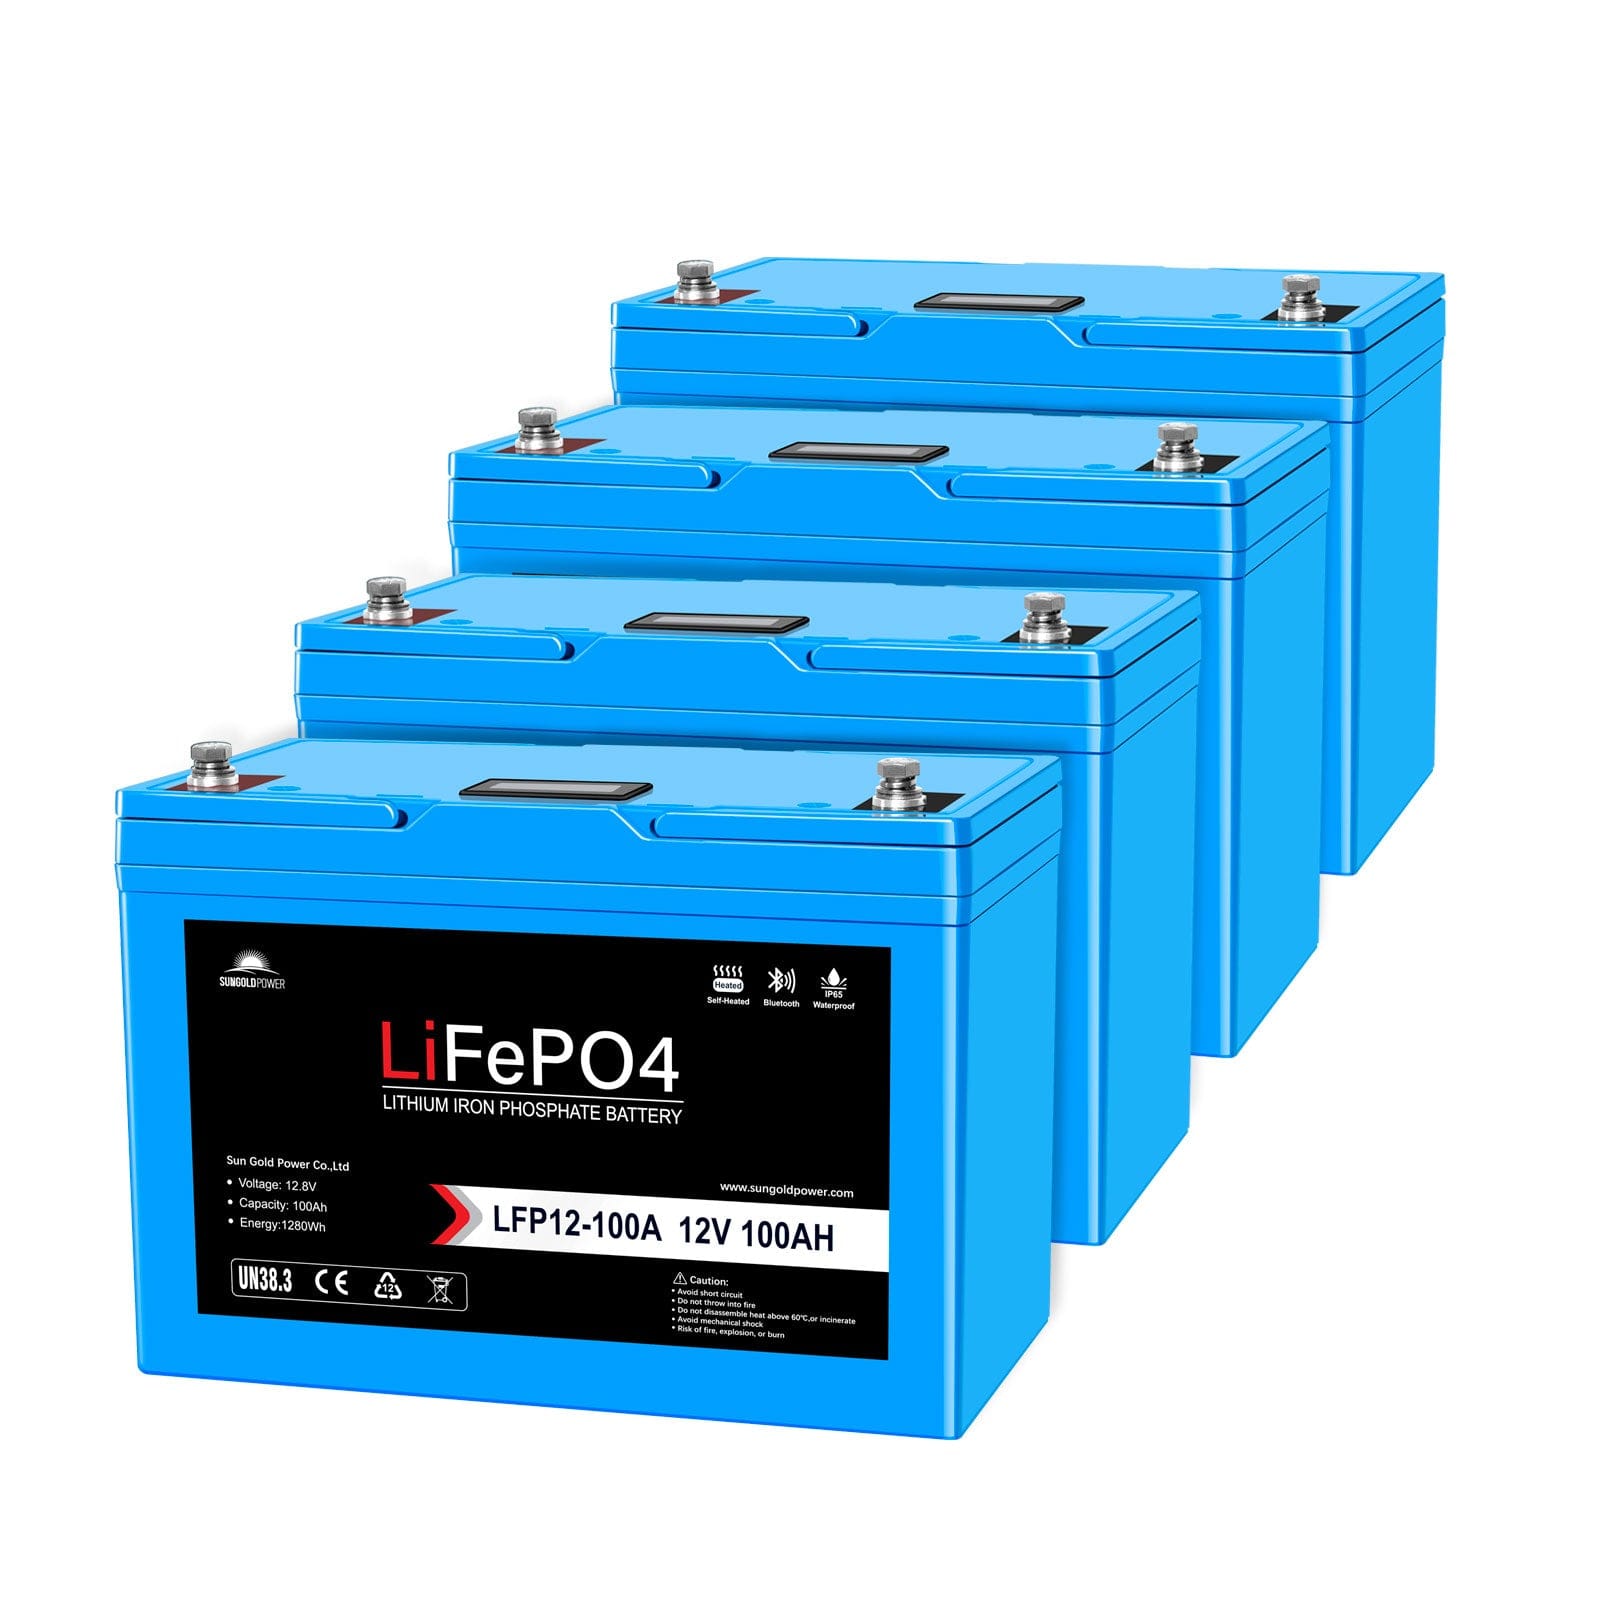 4 X 12V 100AH LiFePO4 Deep Cycle Lithium Battery / Bluetooth /Self-heating / IP65 SunGoldPower Battery